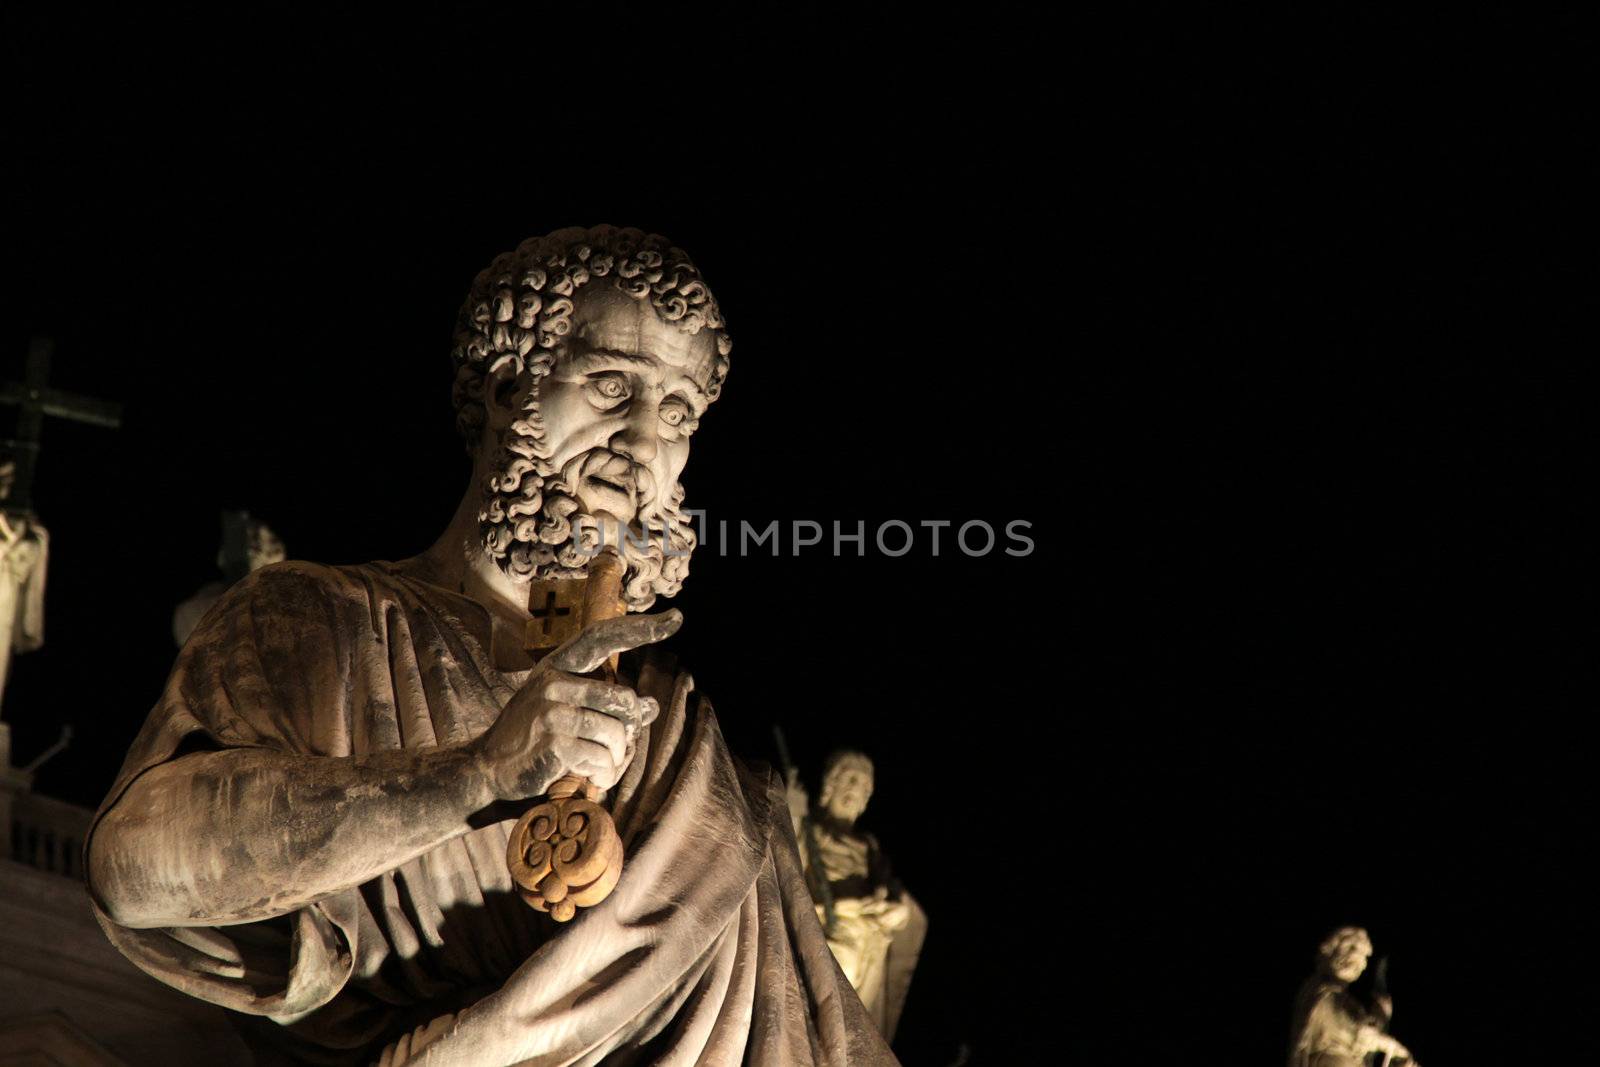 A statue of St. Peter outside St. Peter's Basilica, Vatican City, Rome.  Shot at night.
